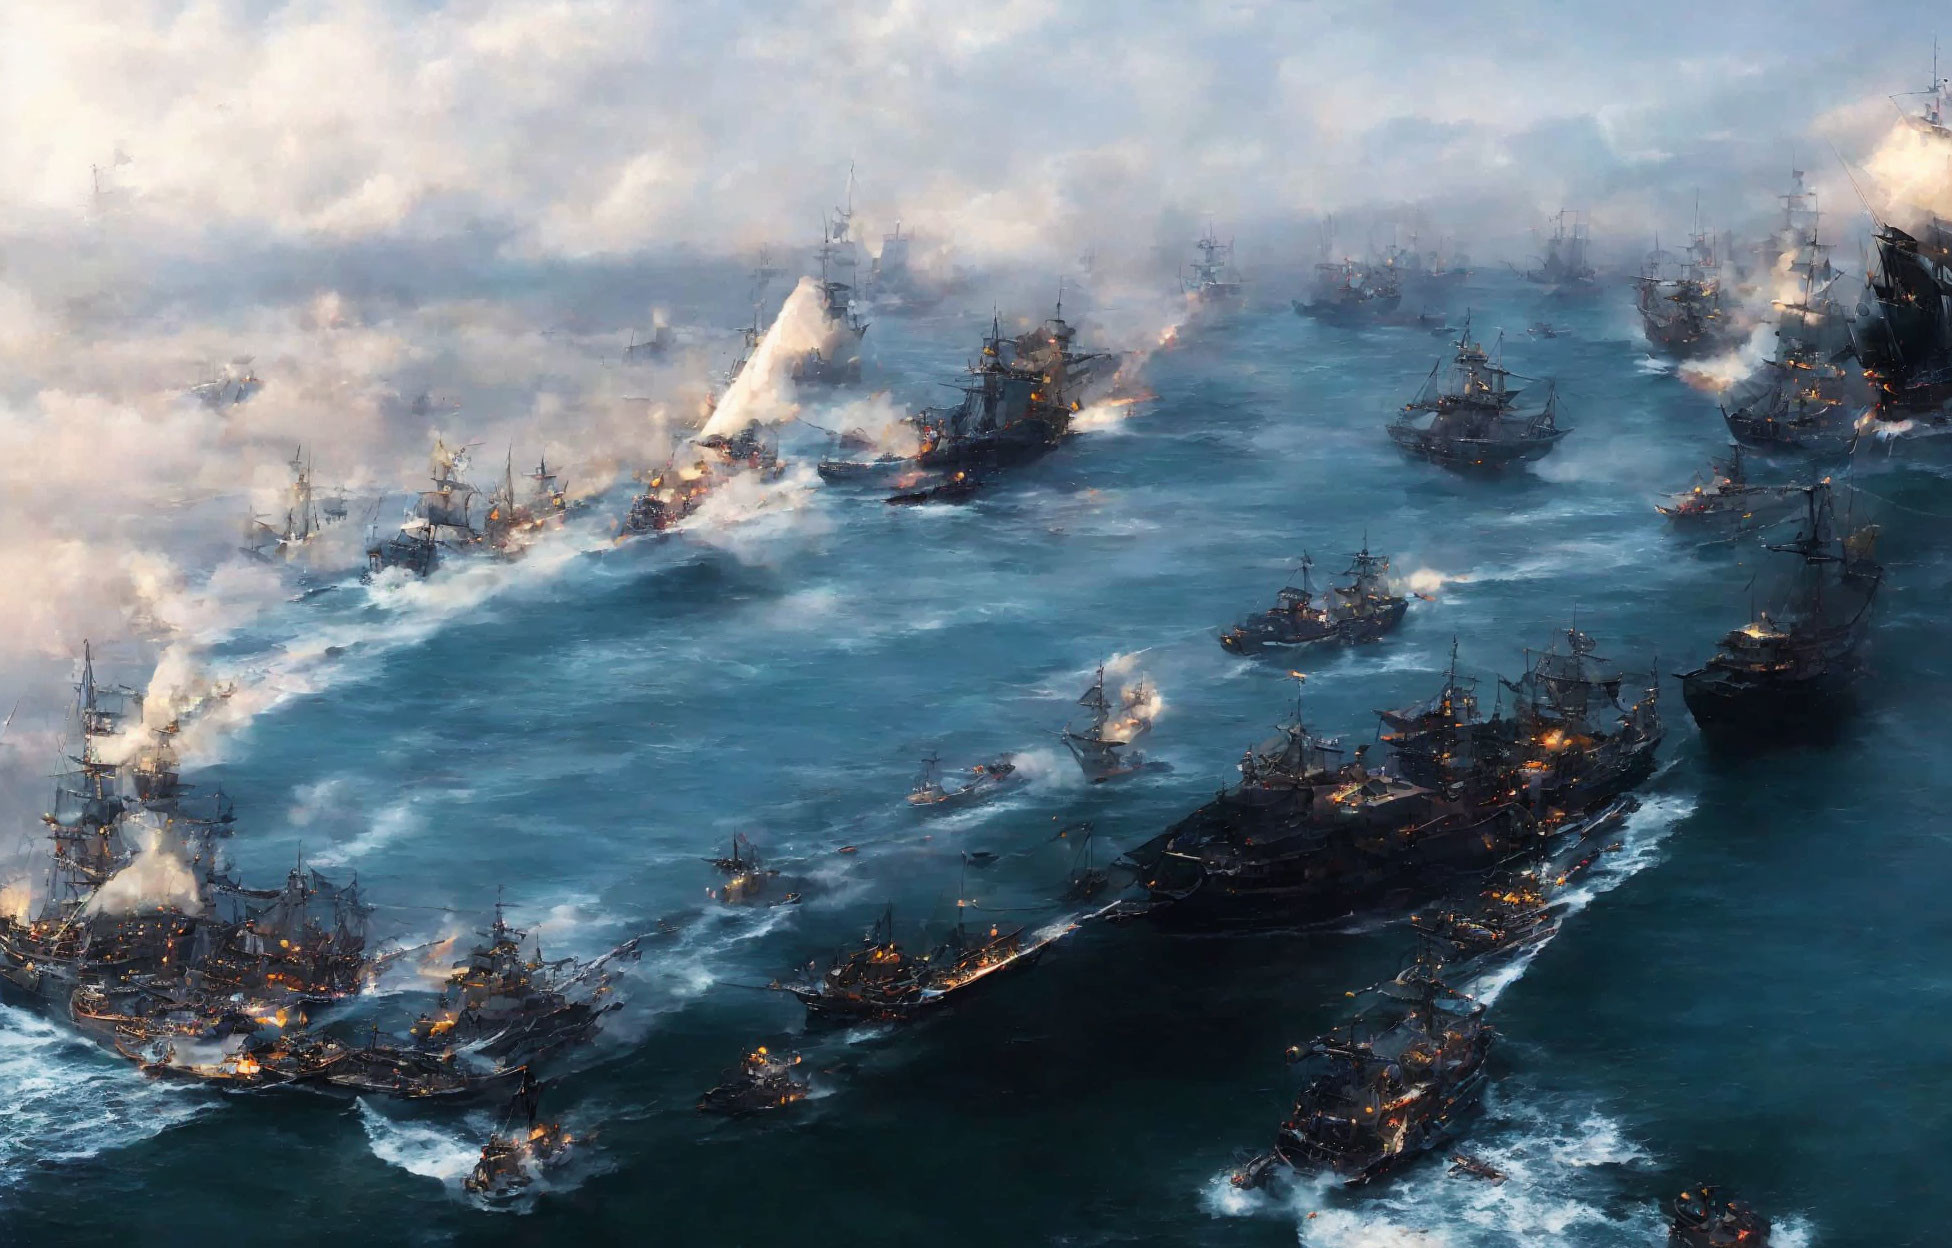 Intense naval battle scene with multiple ships in combat on the open sea